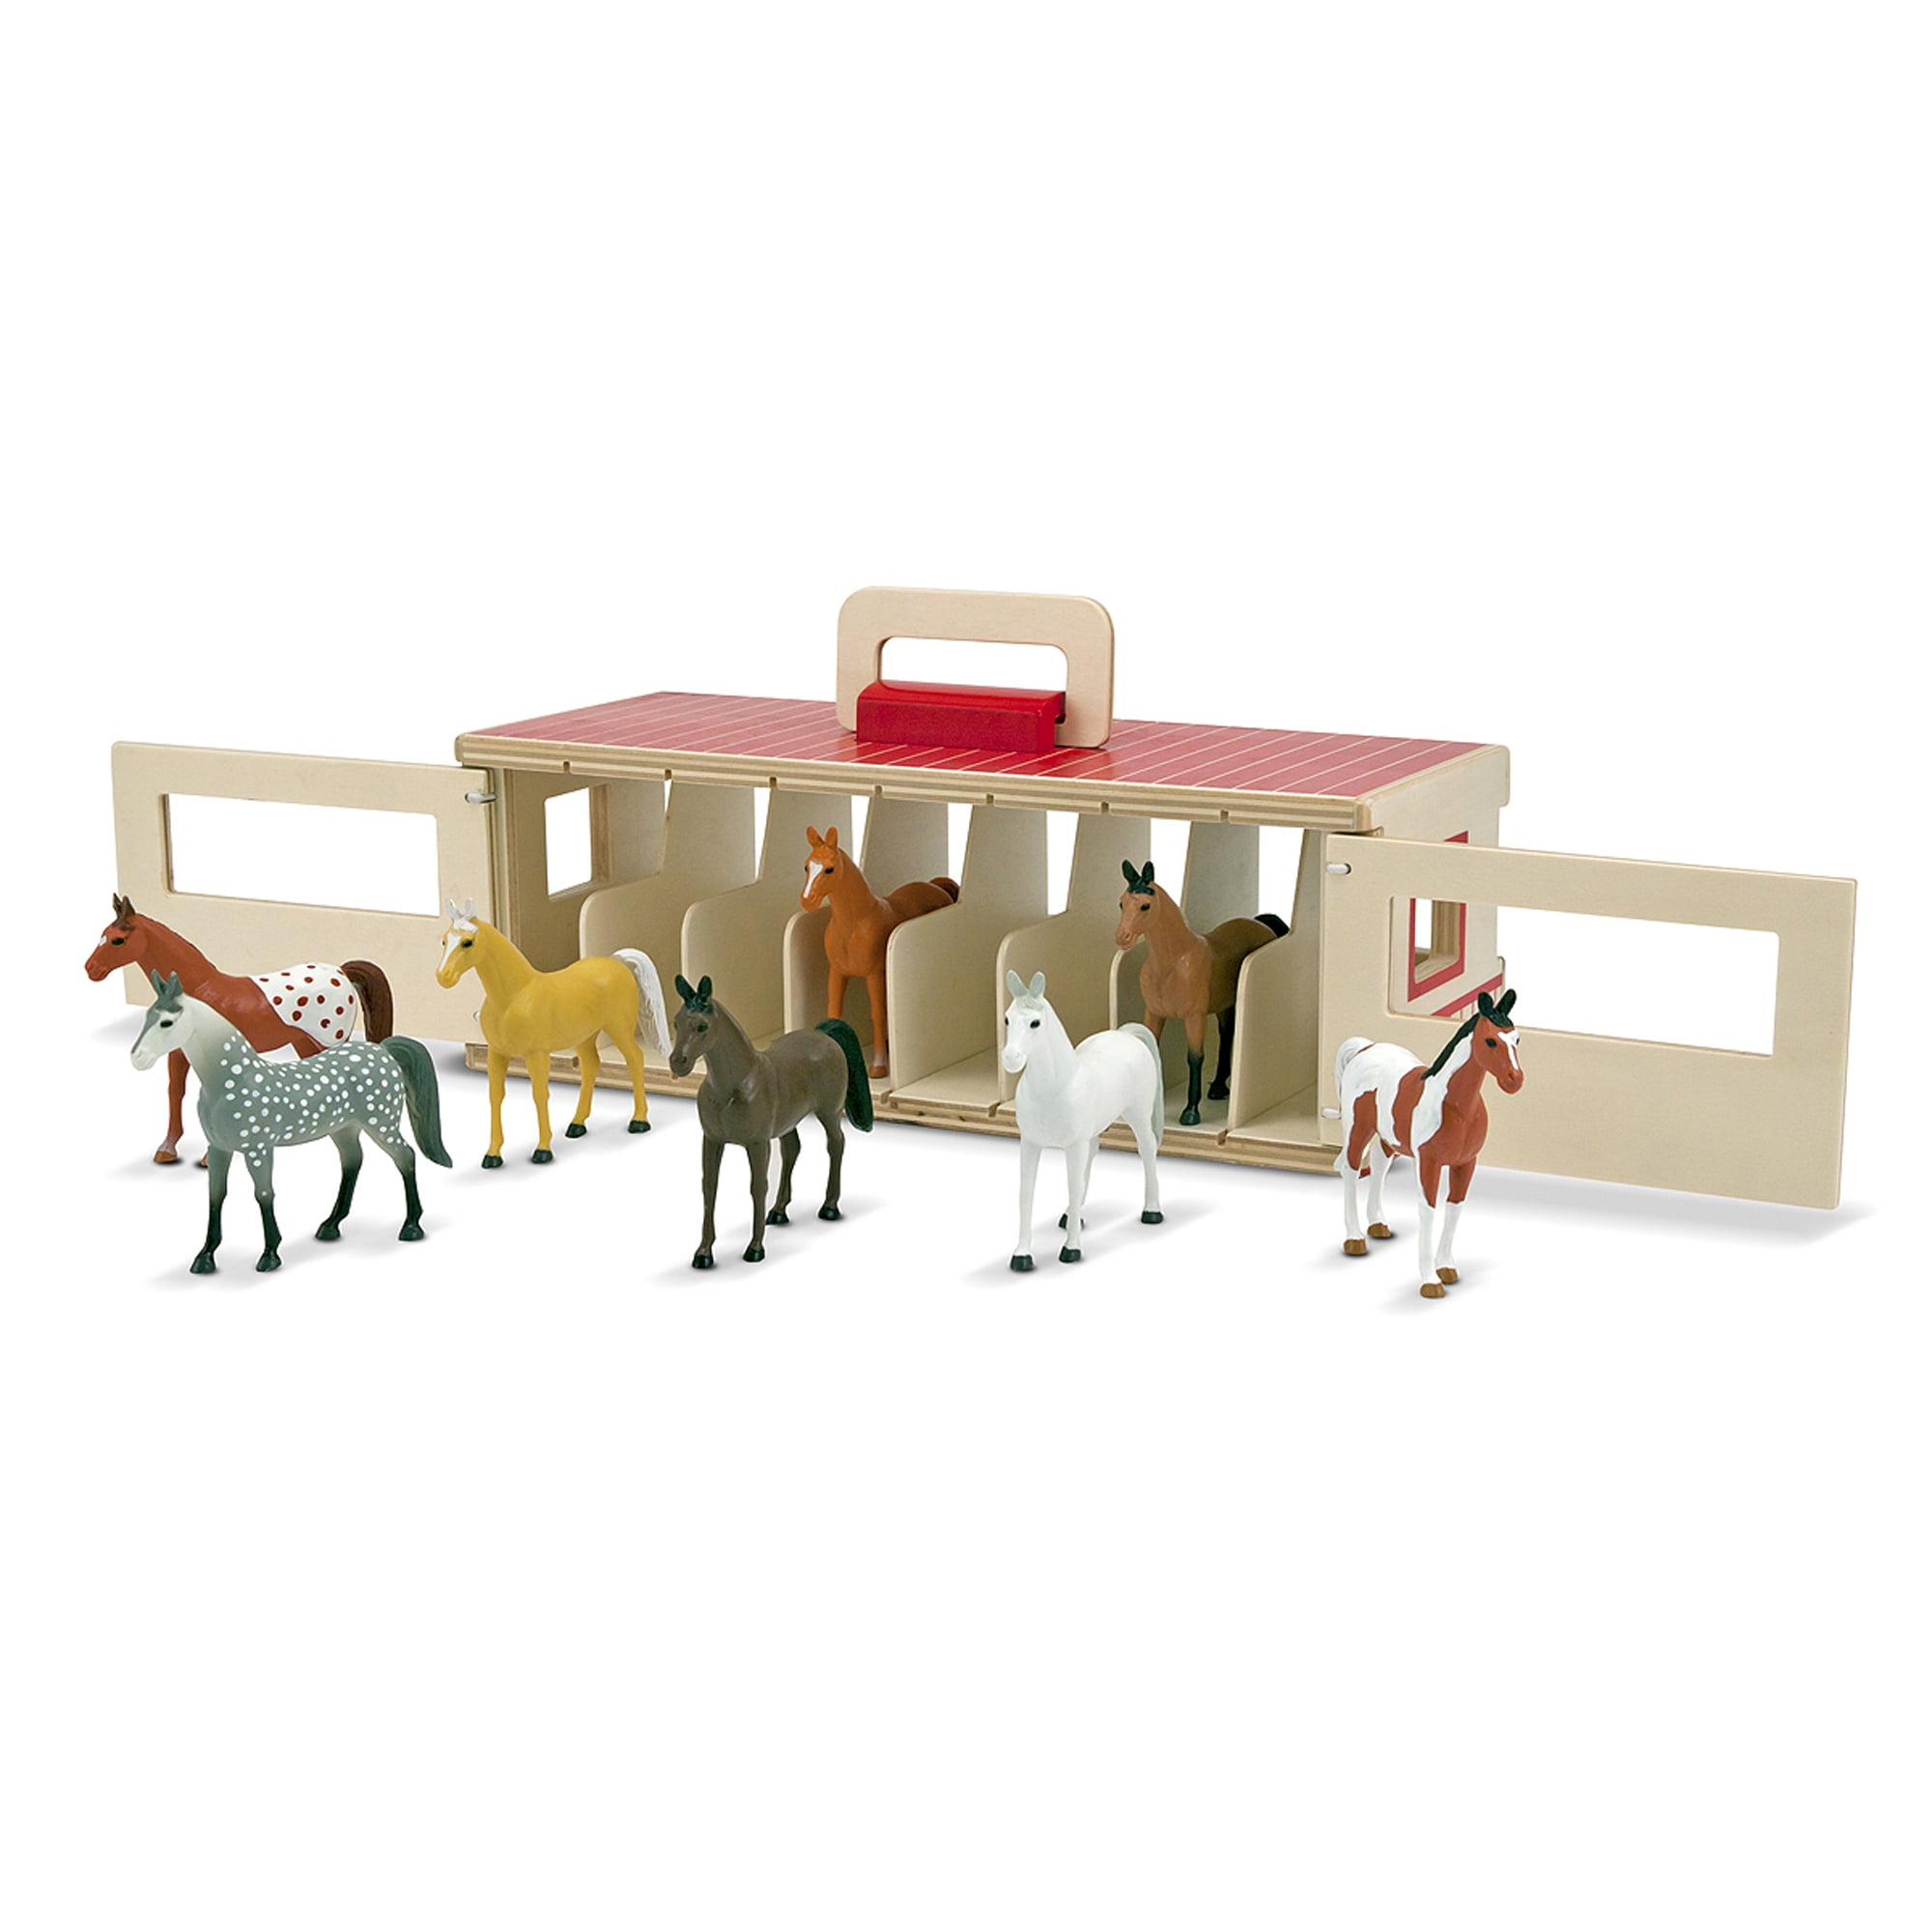 Stable with Horses Farm Barn Play Set Kid Pretend Play Toy Action Figure Playset 